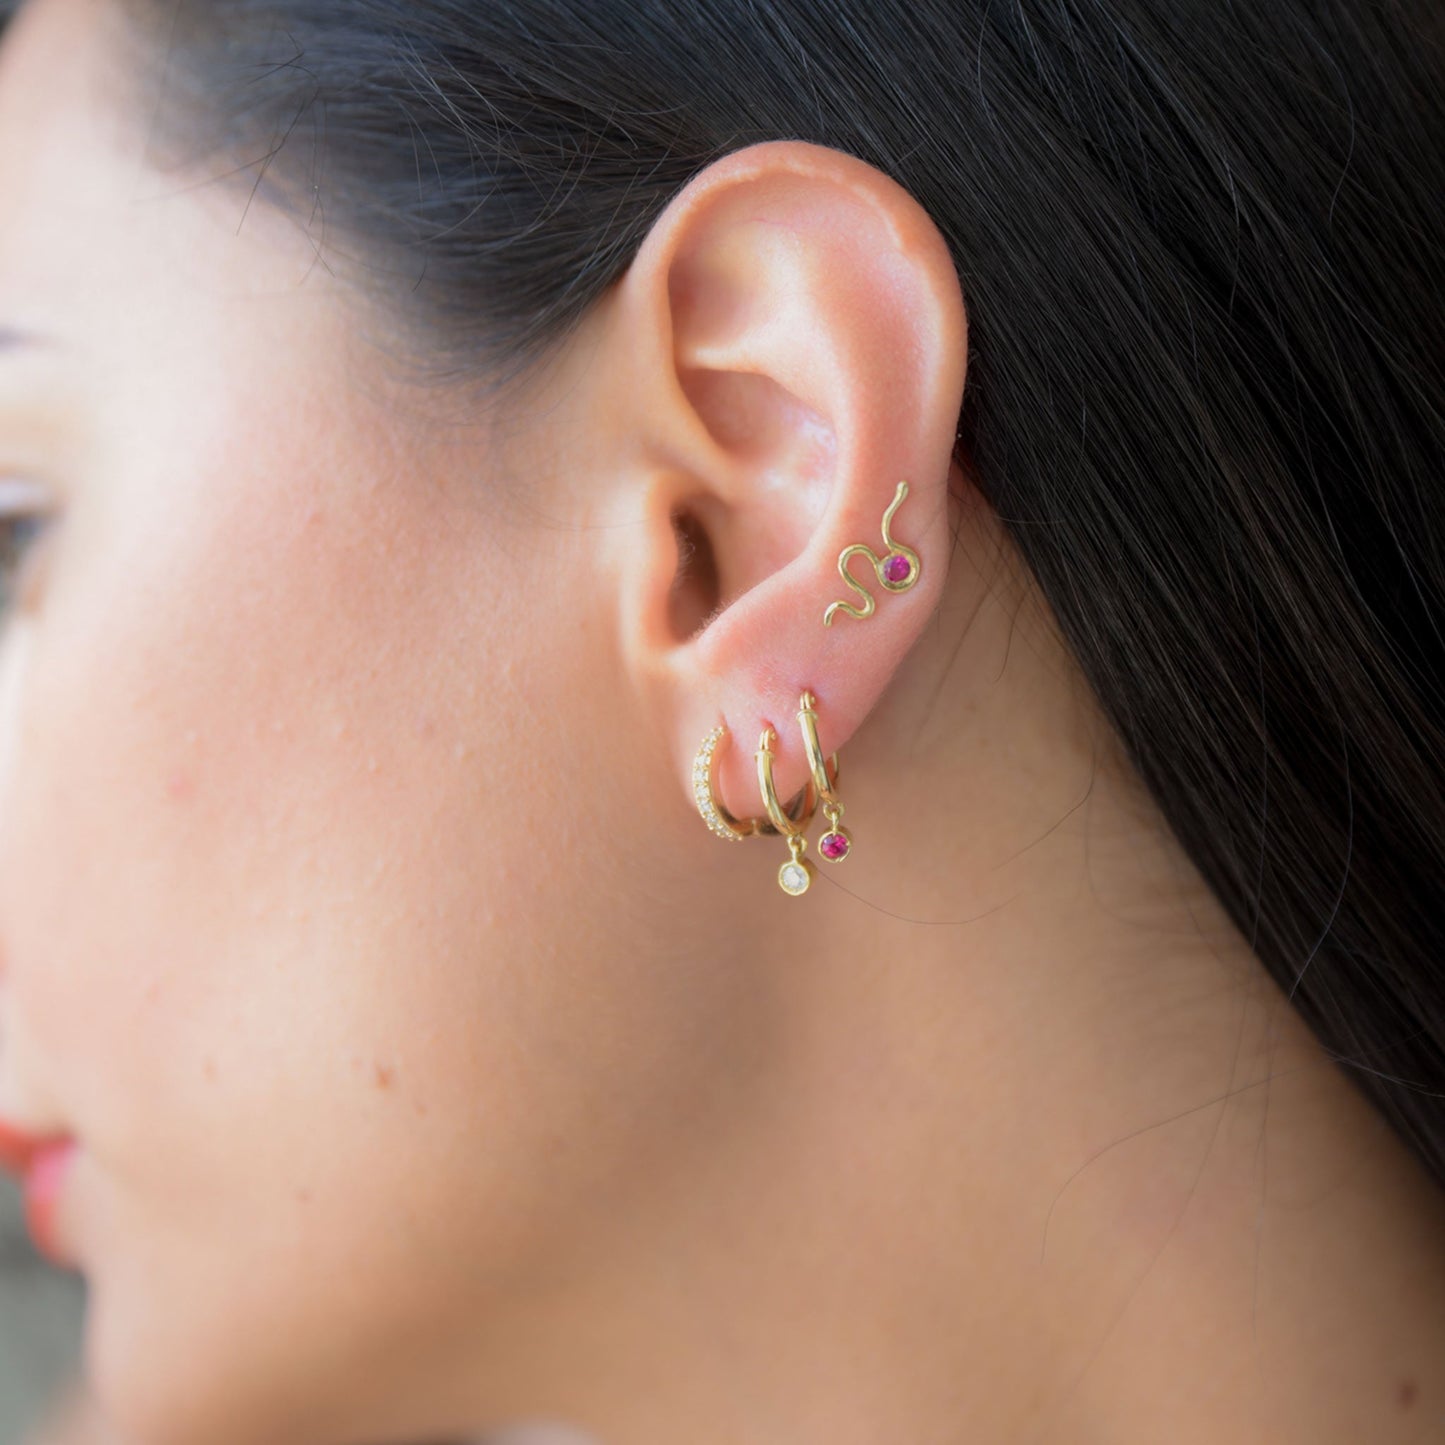 The Serpent Earring - Oria.jewelry